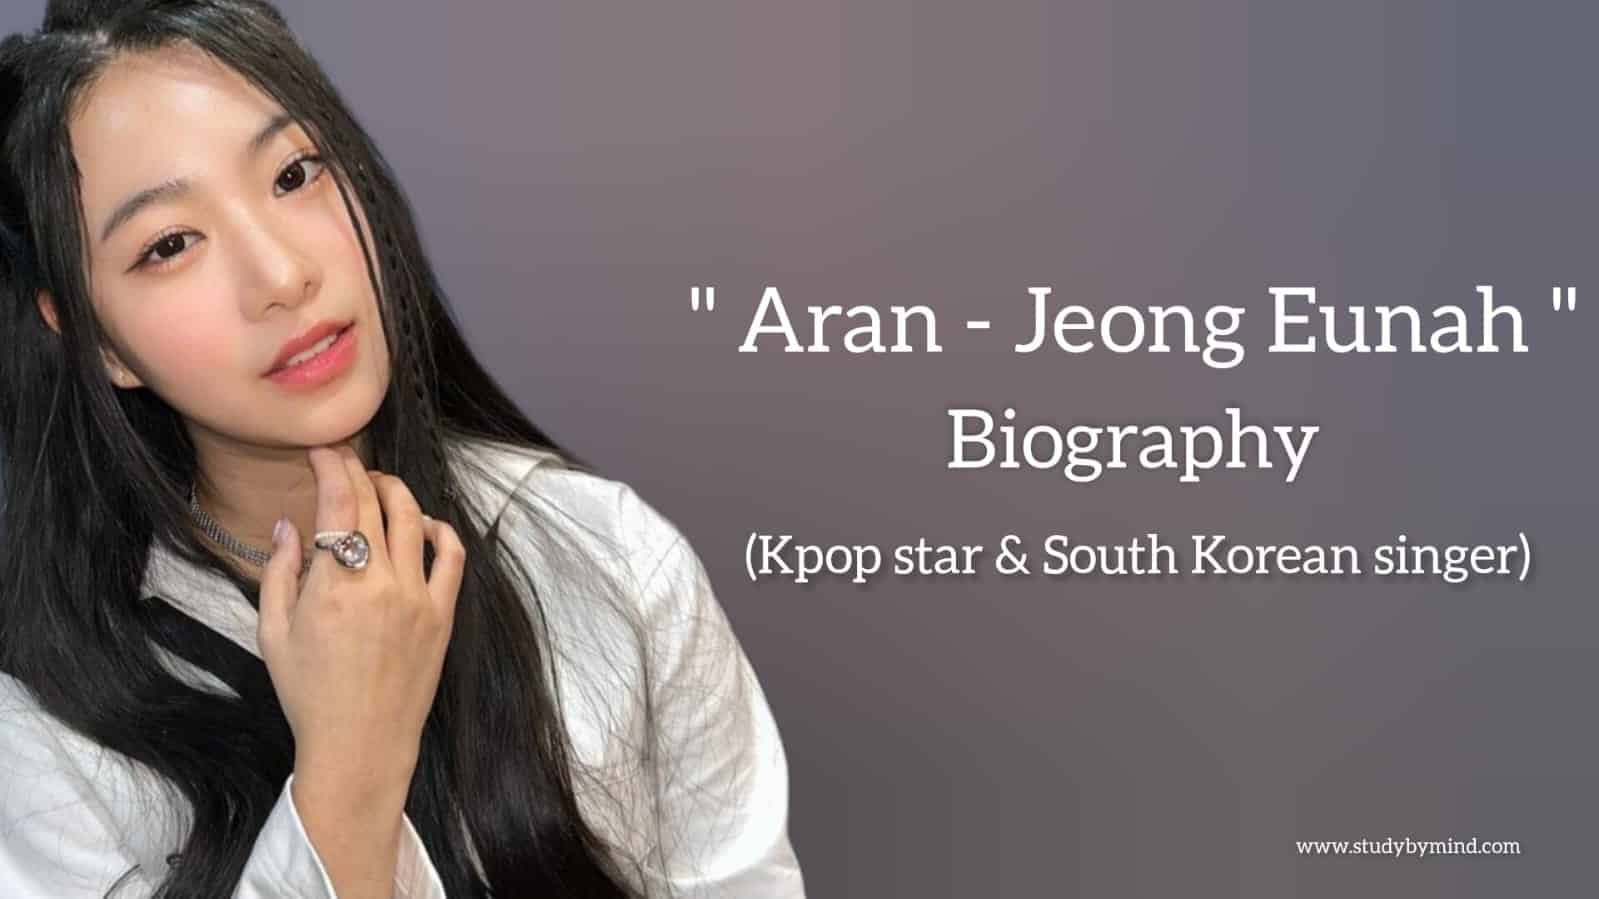 You are currently viewing Aran kpop biography in english (Kpop star, Korean singer and dancer), Jeong Eunah biography, Age